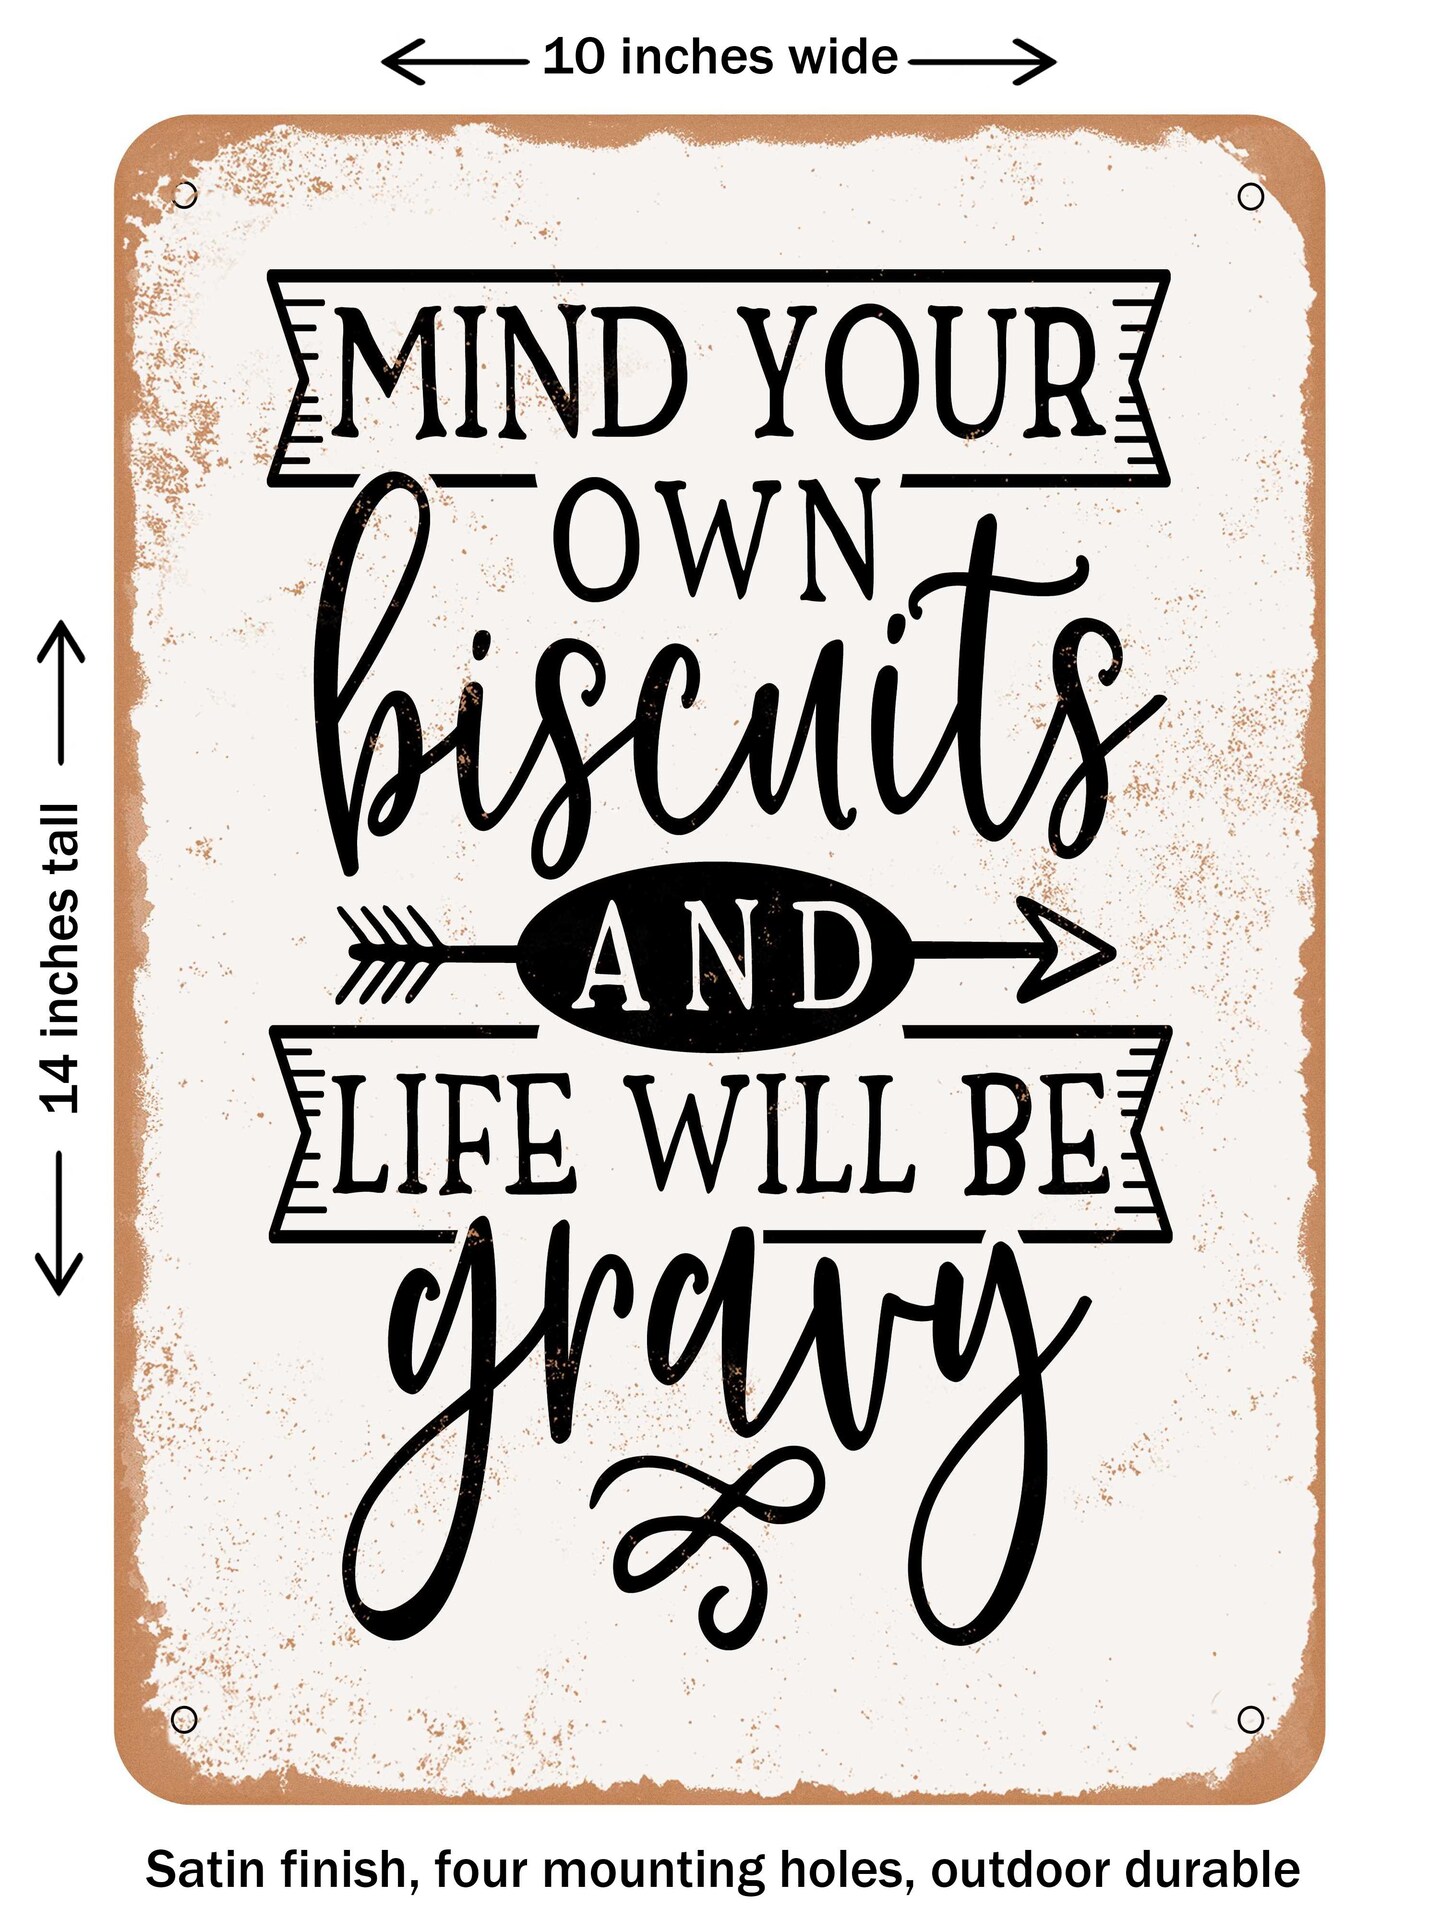 DECORATIVE METAL SIGN - Mind Your Own Biscuits and Life Will Be Gravy - Vintage Rusty Look